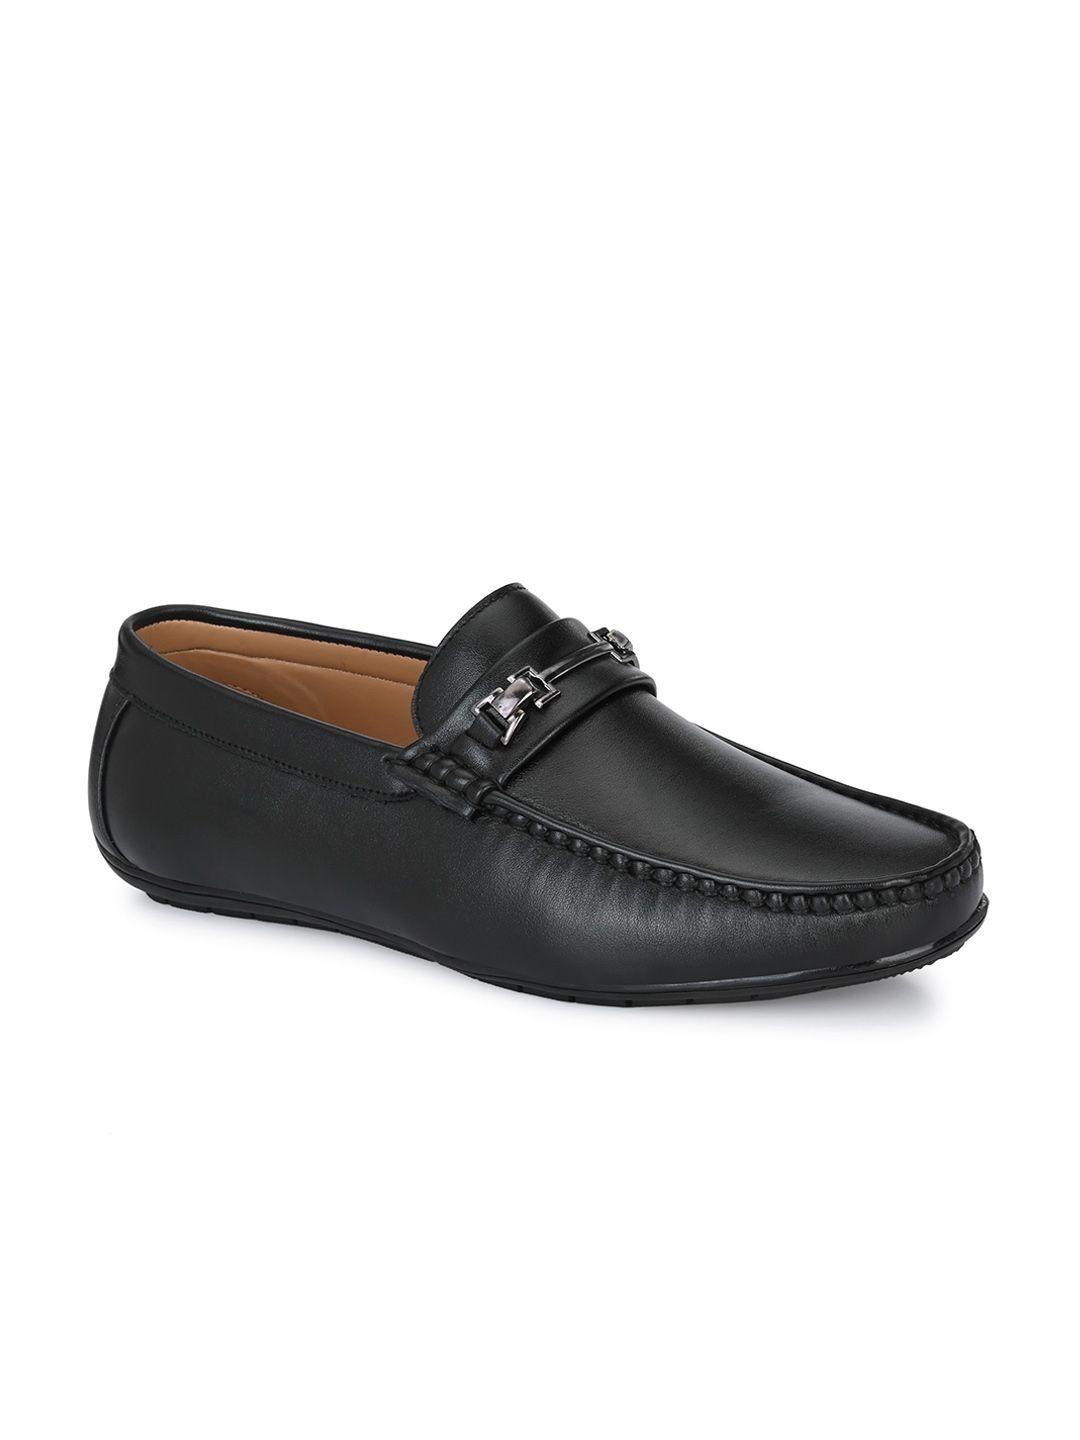 carlo romano men black solid formal leather loafers